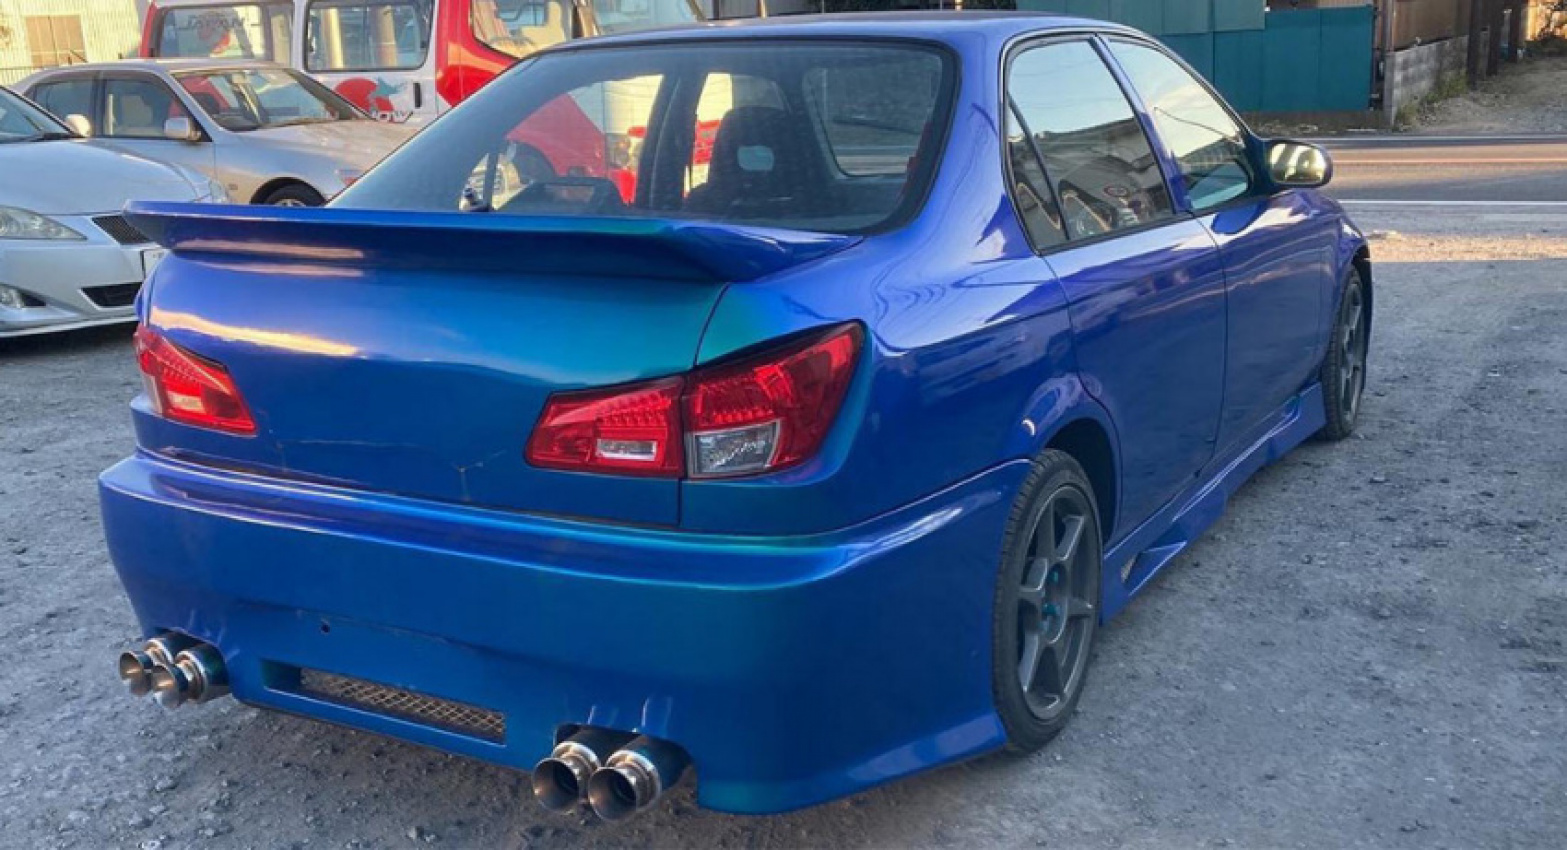 autos, cars, honda, lexus, news, face swaps, honda civic, japan, lexus is, offbeat news, tuning, old honda civic pretends to be a lexus is, fools absolutely no one